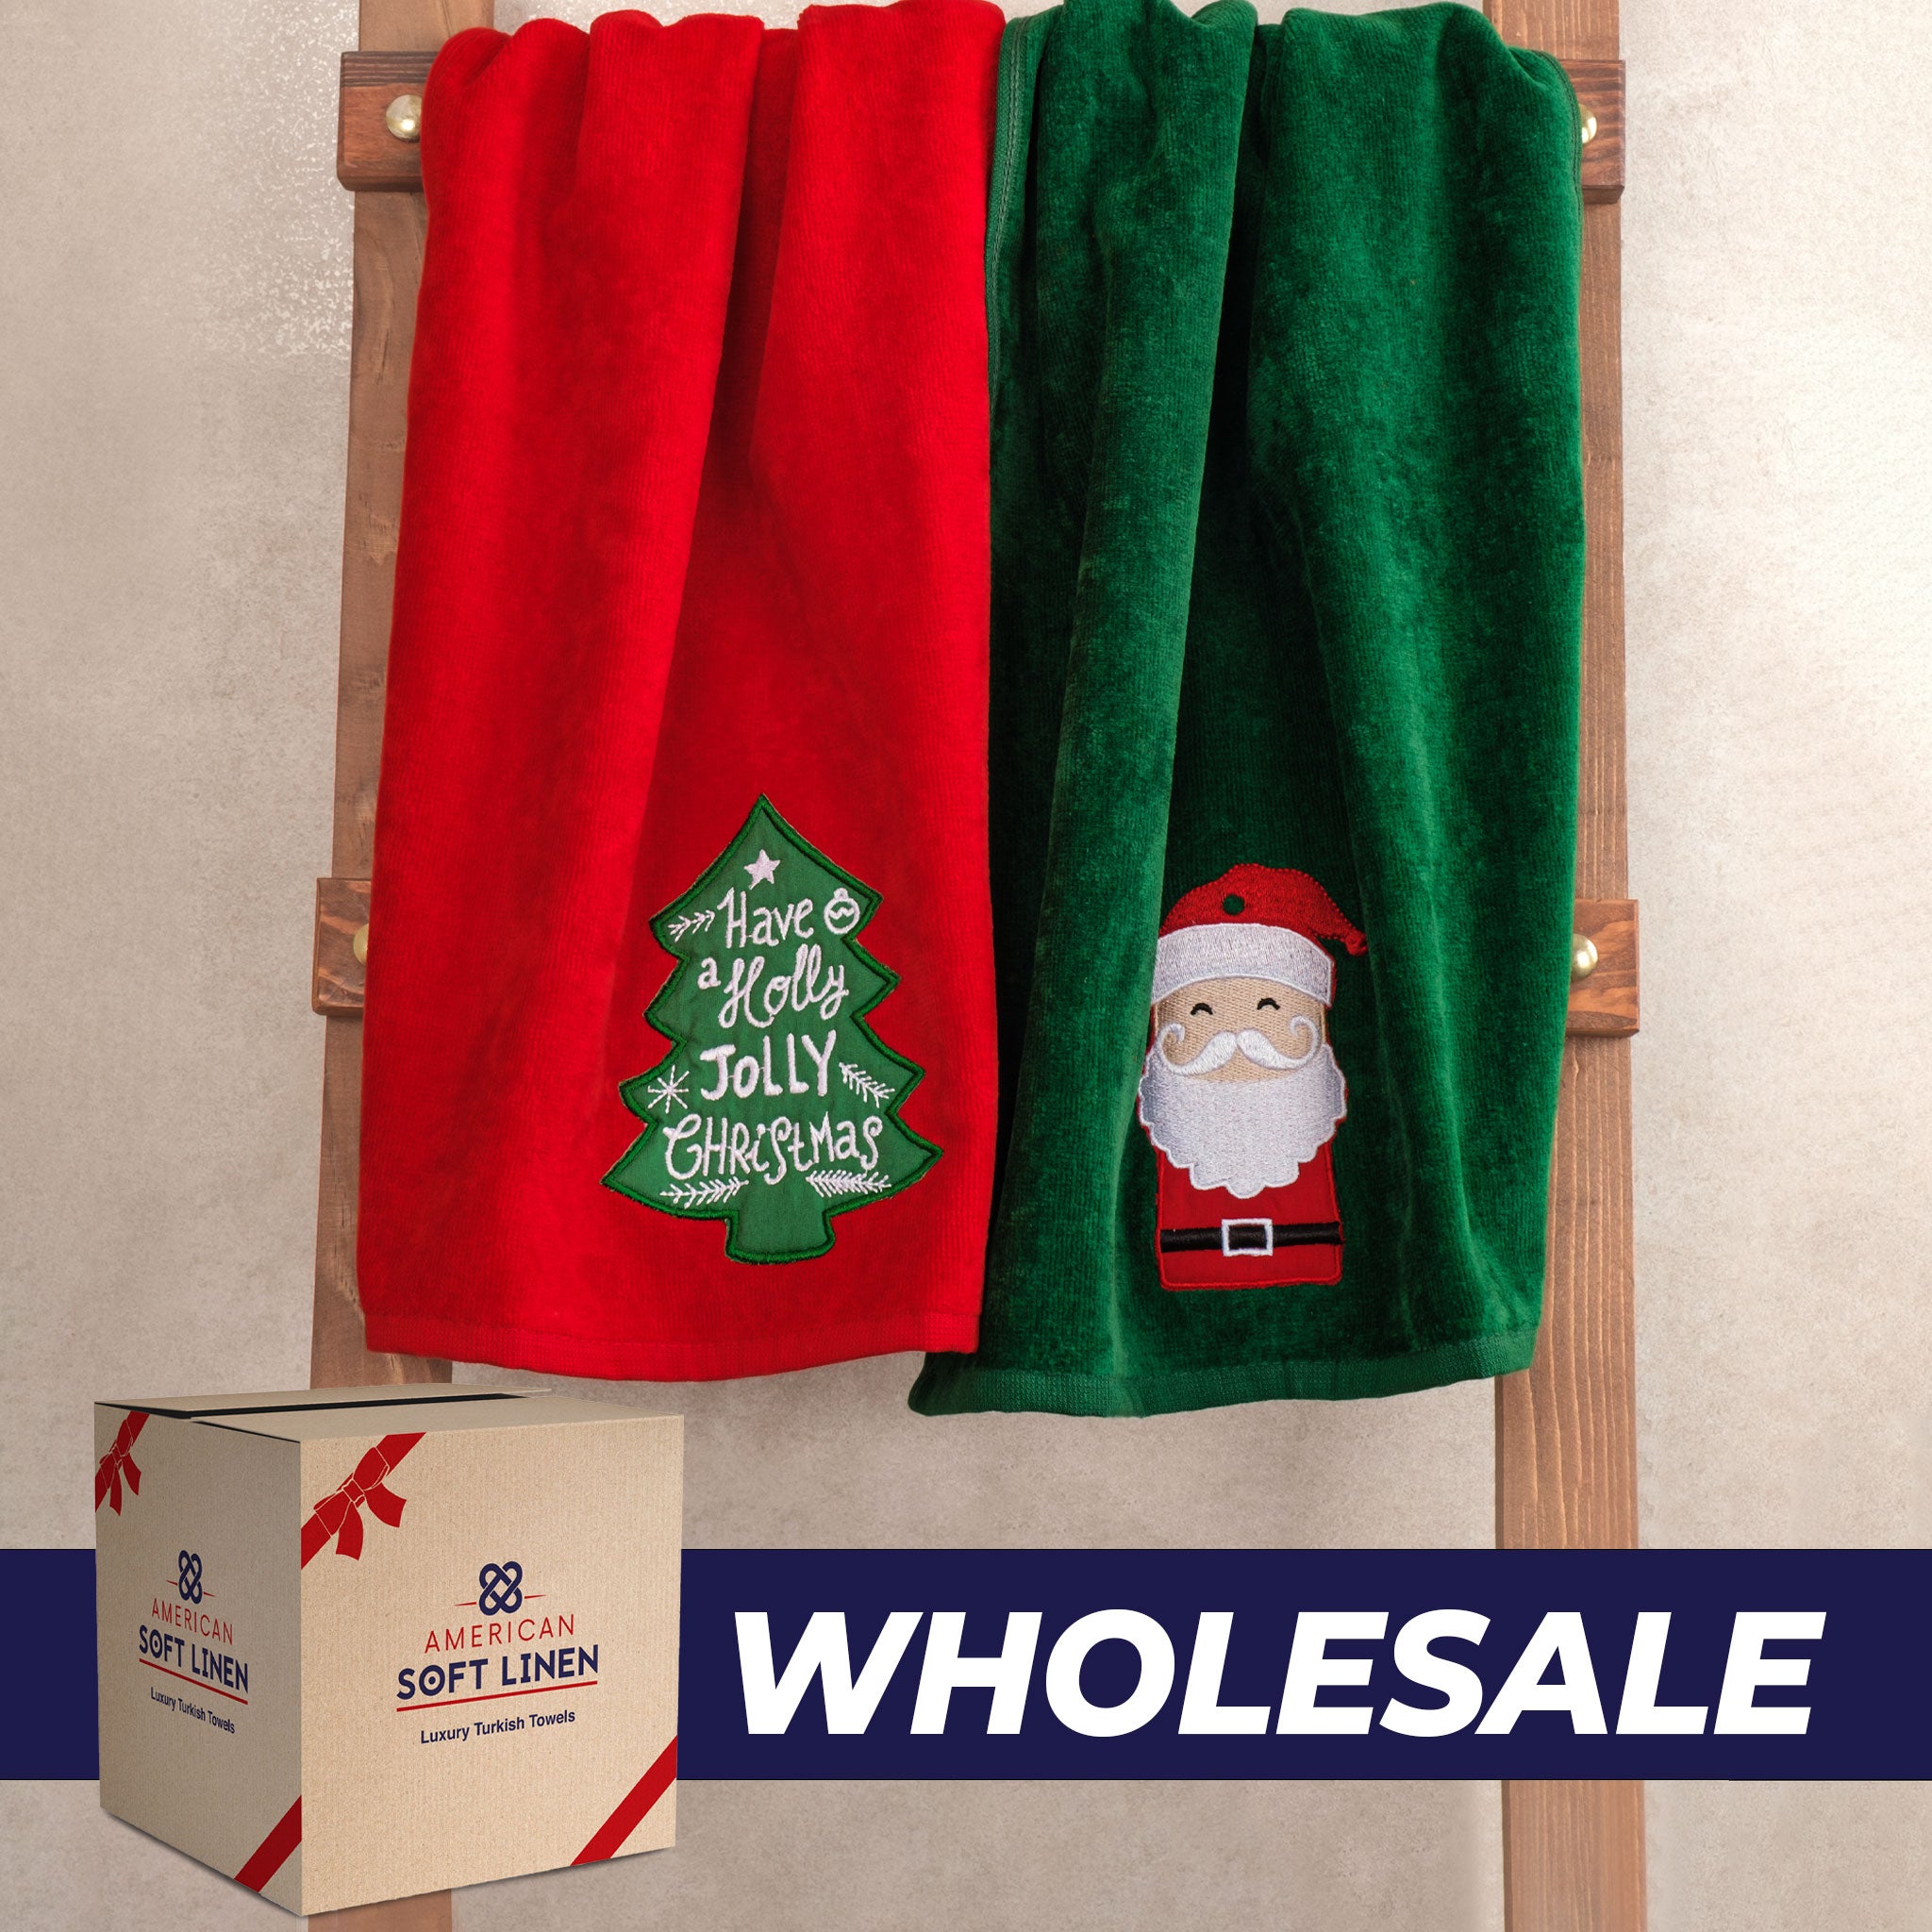 American Soft Linen - Christmas Towels 2  Packed Embroidered Towels for Decor Xmas - 60 Set Case Pack - Santa-tree - 0